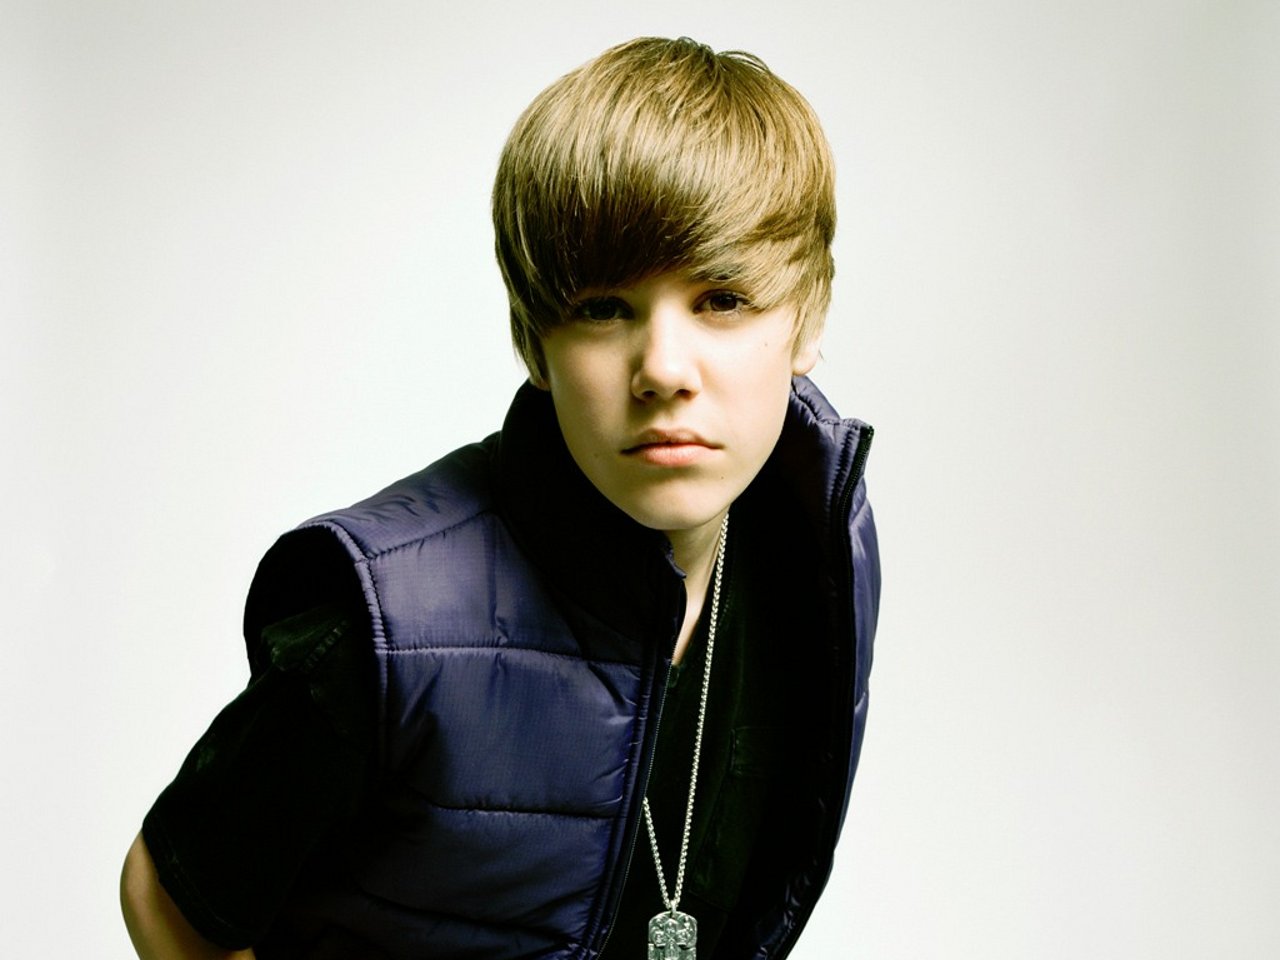 Justin Bieber New HD wallpapers 2012-2013 ~ All About HD Wallpapers1280 x 960